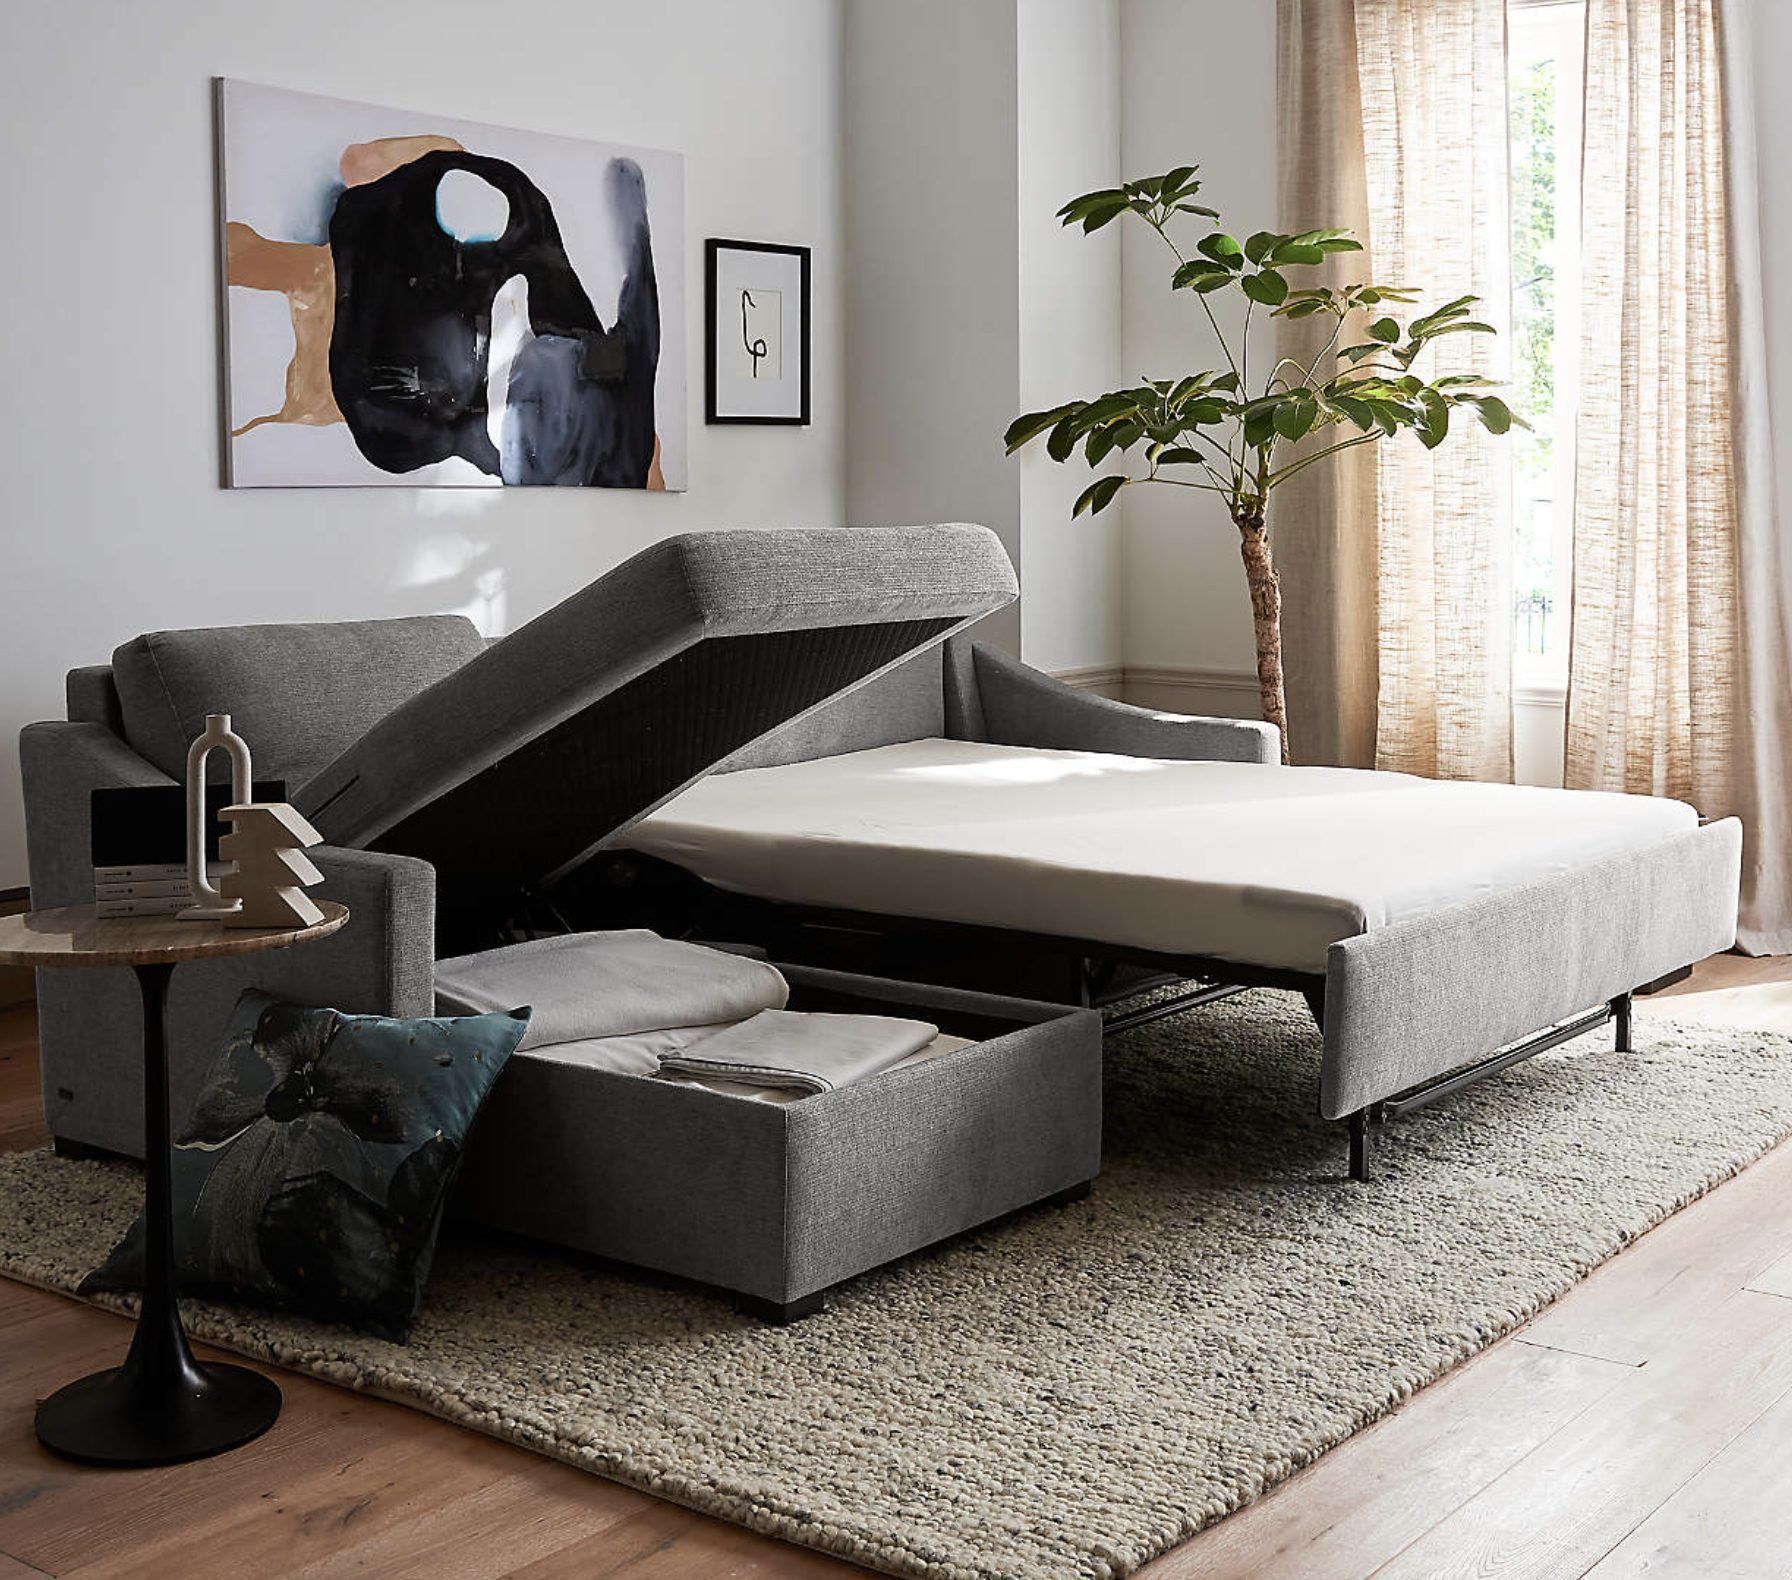 27 Of The Best Sectional Couches With Pull Out Beds In 2023 – Happily  Inspired For Pull Out Couch Beds (View 12 of 20)